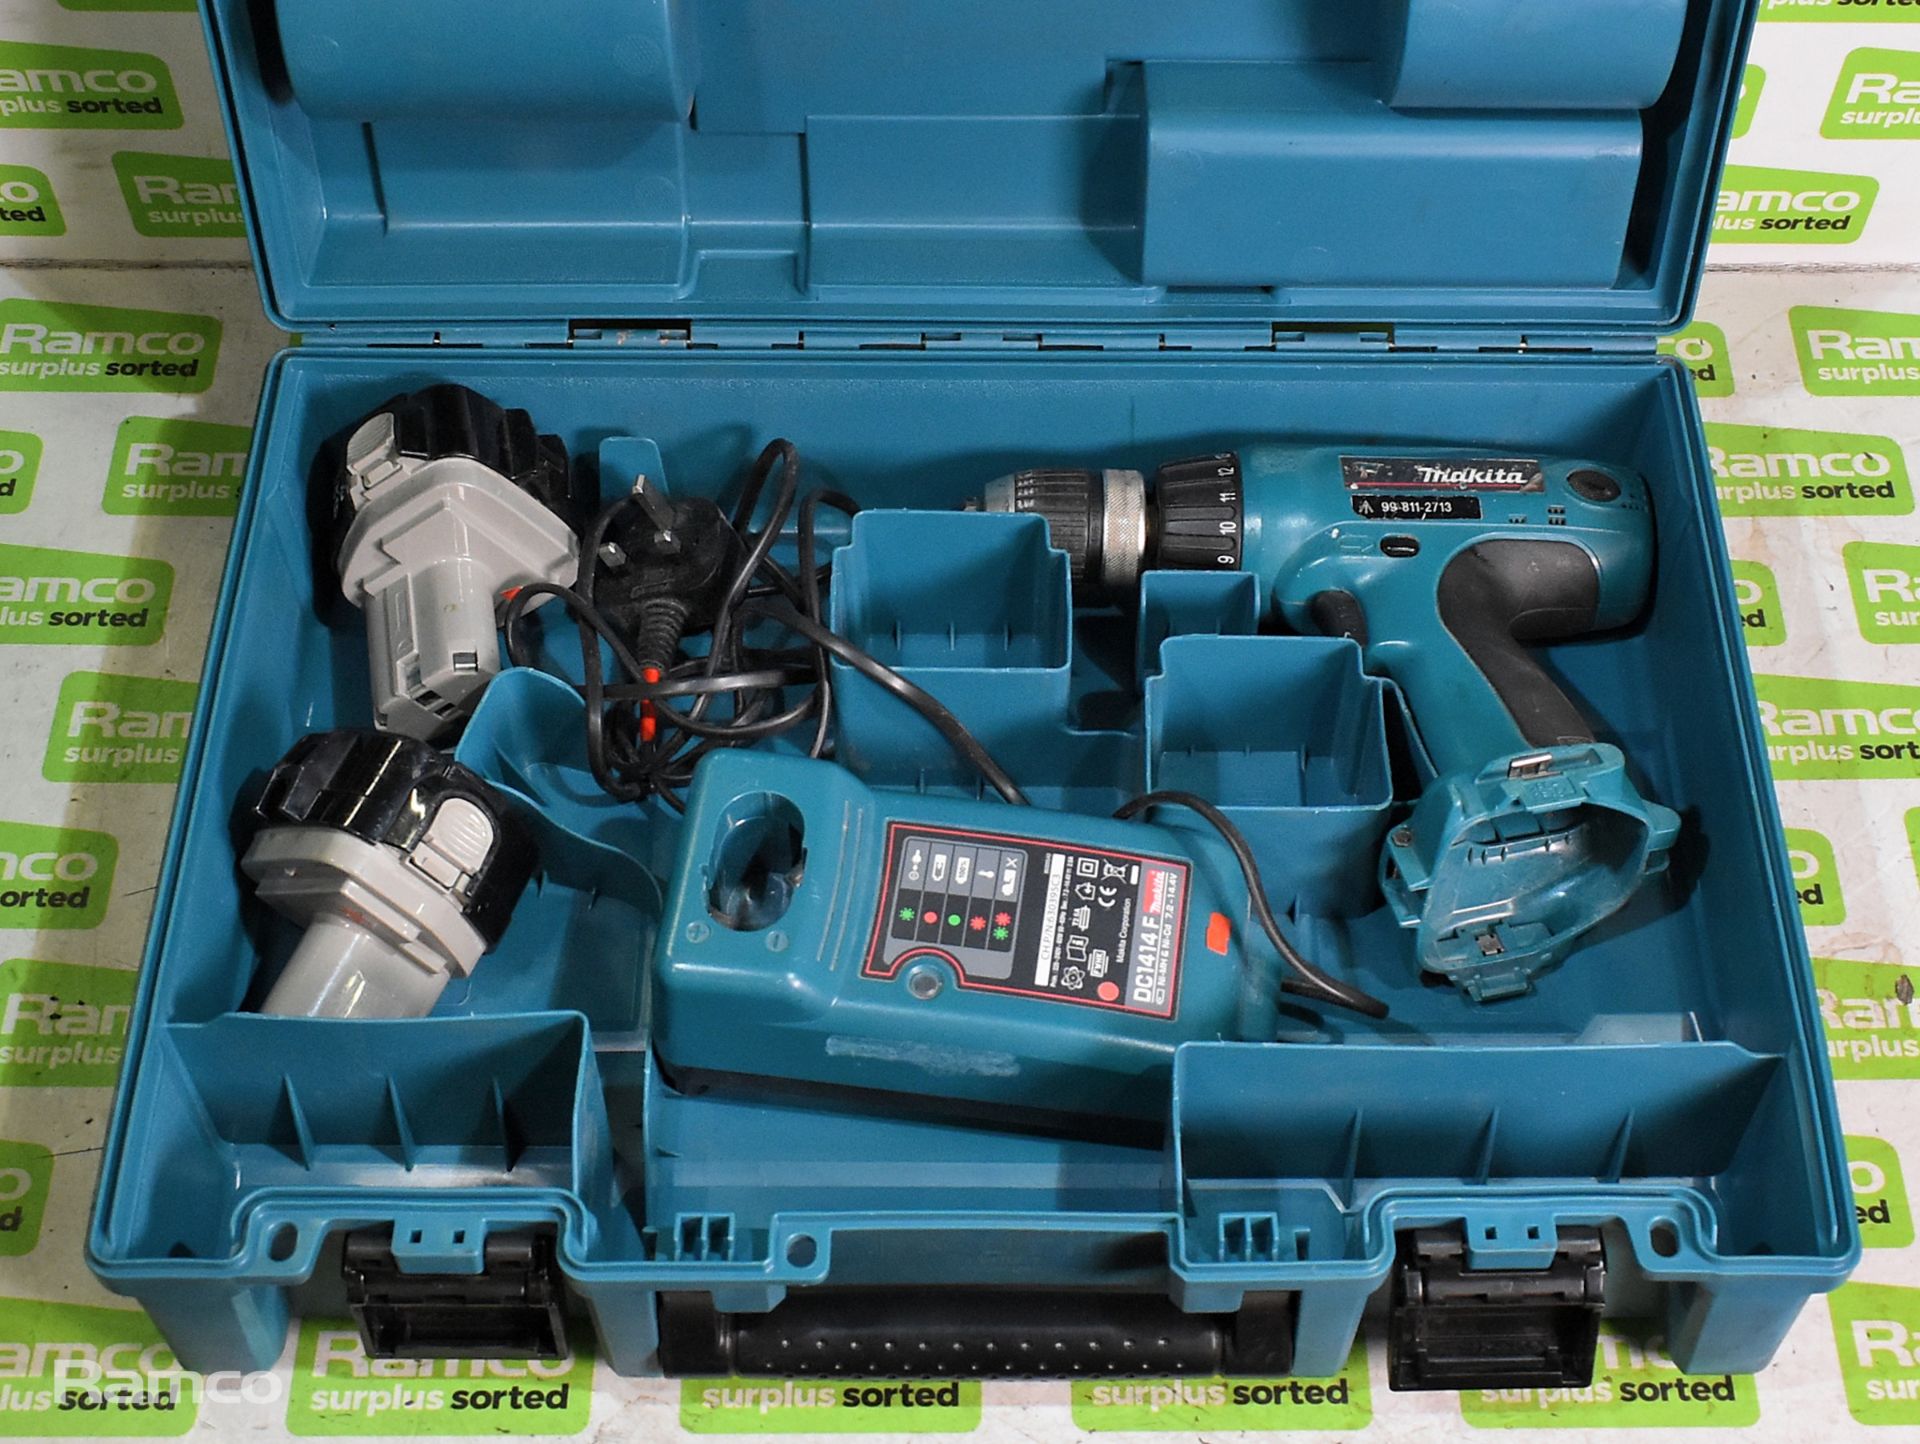 Makita 6317D cordless drill - DC1414F charger - 2 x 12V batteries - case - Image 2 of 7